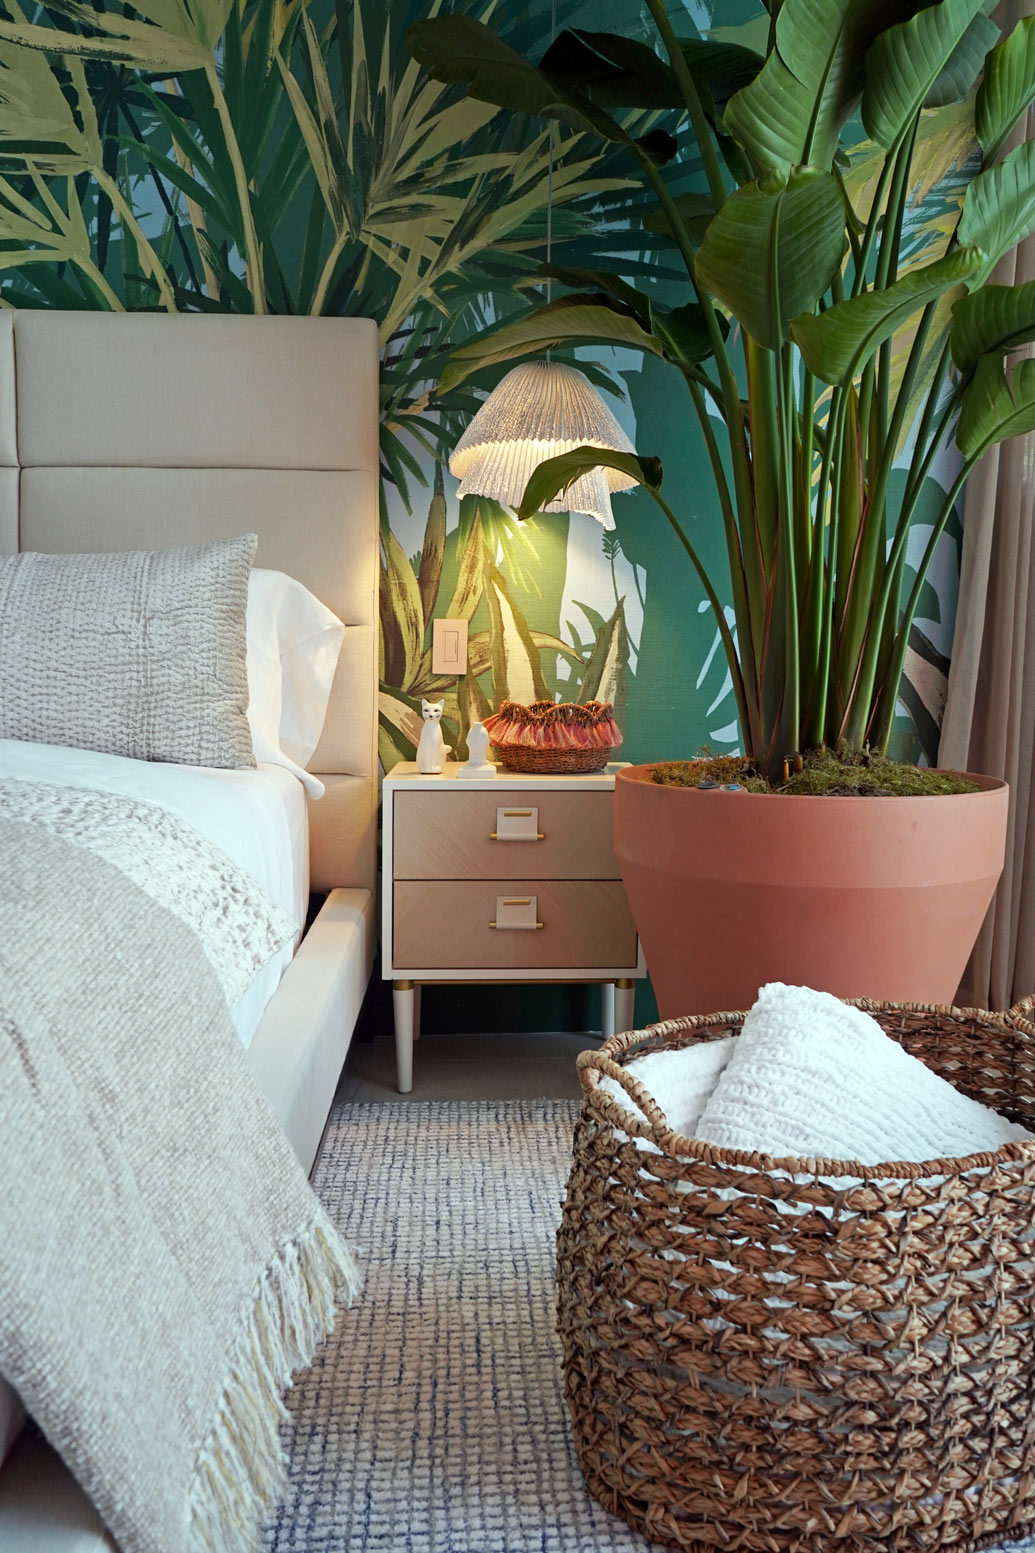 A Tropical Resort-Inspired Guest Room Design